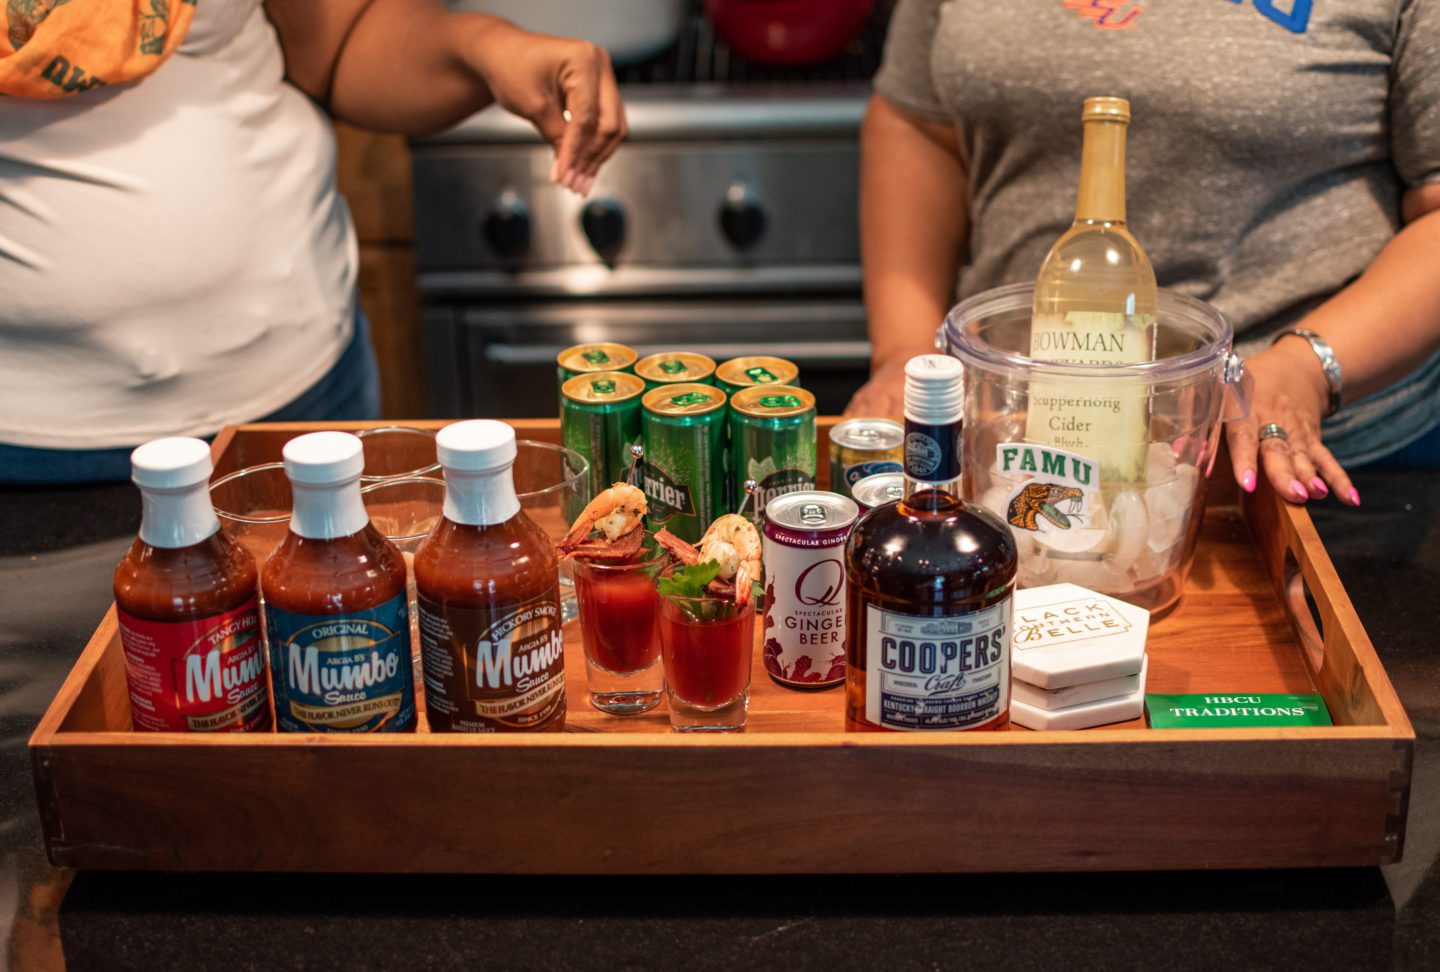 HBCU Tailgate at Home: Bar Cart Inspiration with Heritage